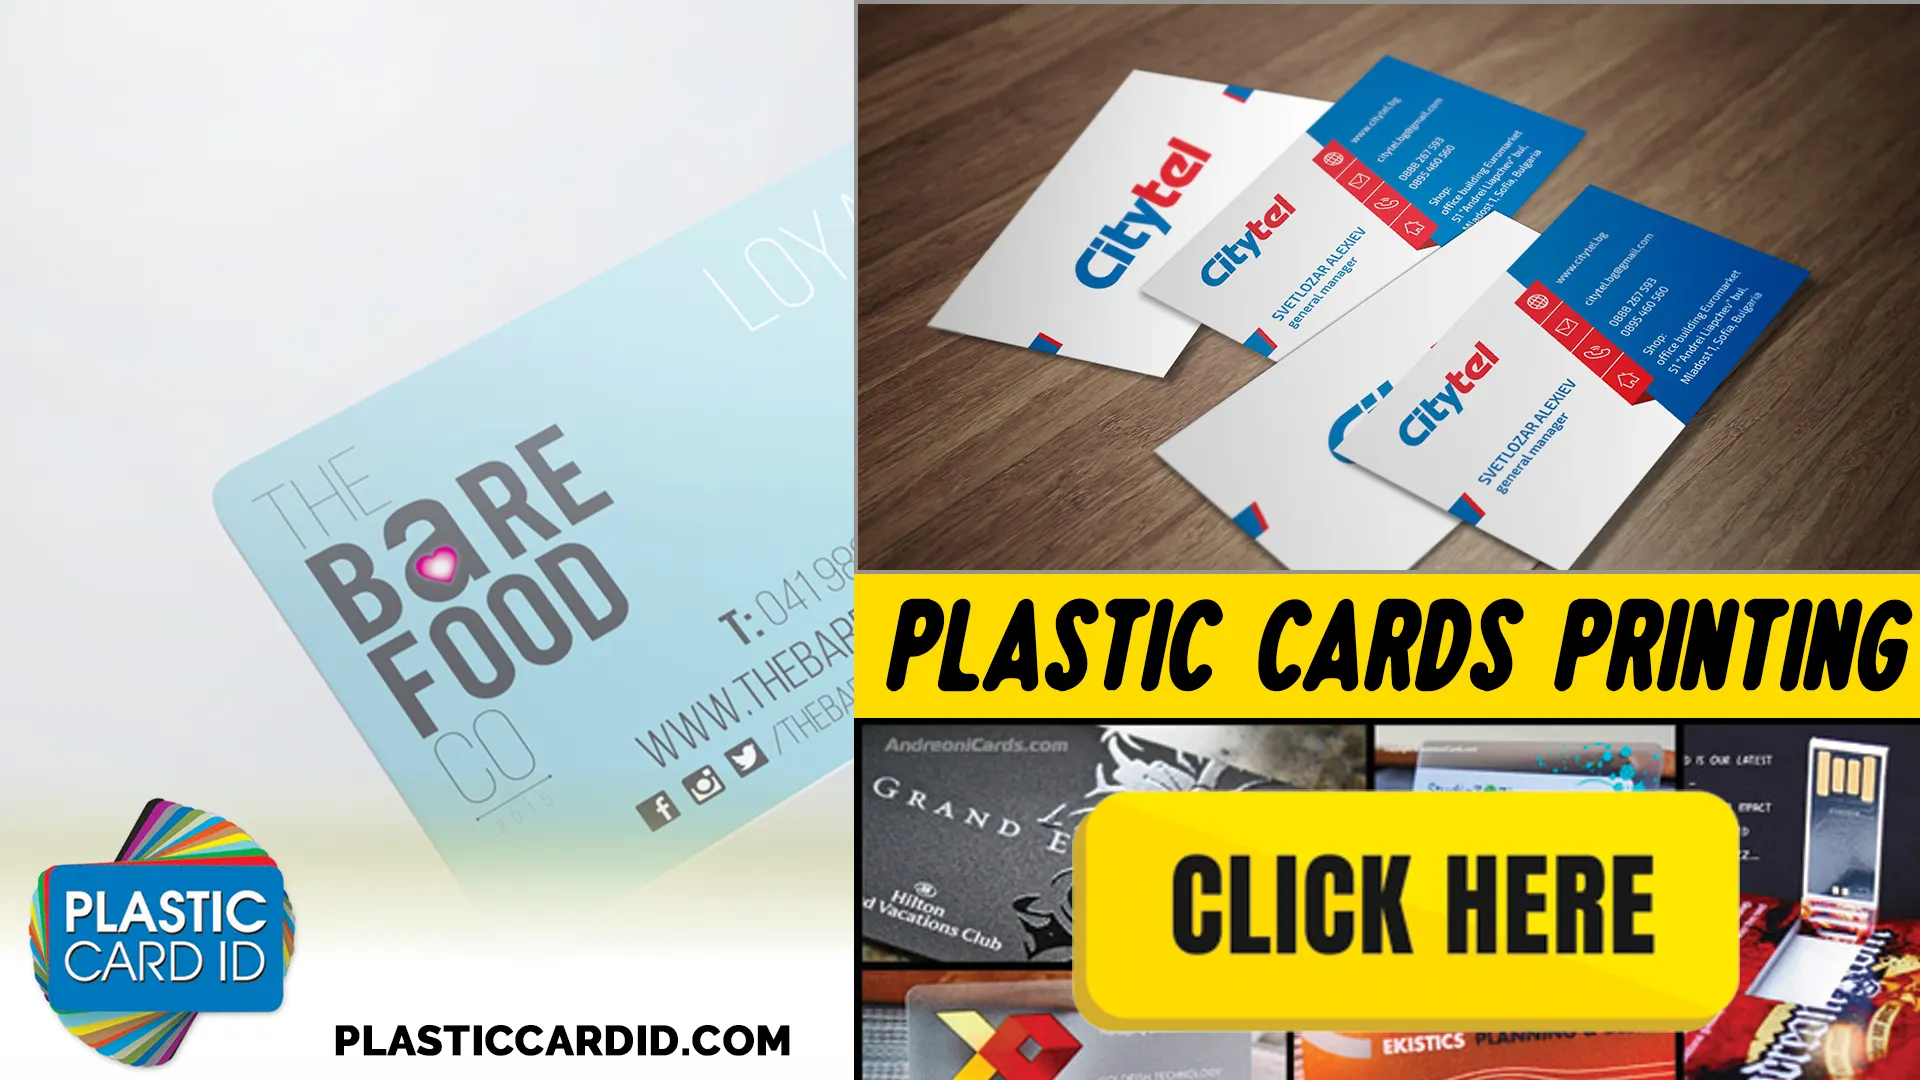 The Case for Outsourcing Plastic Card Production